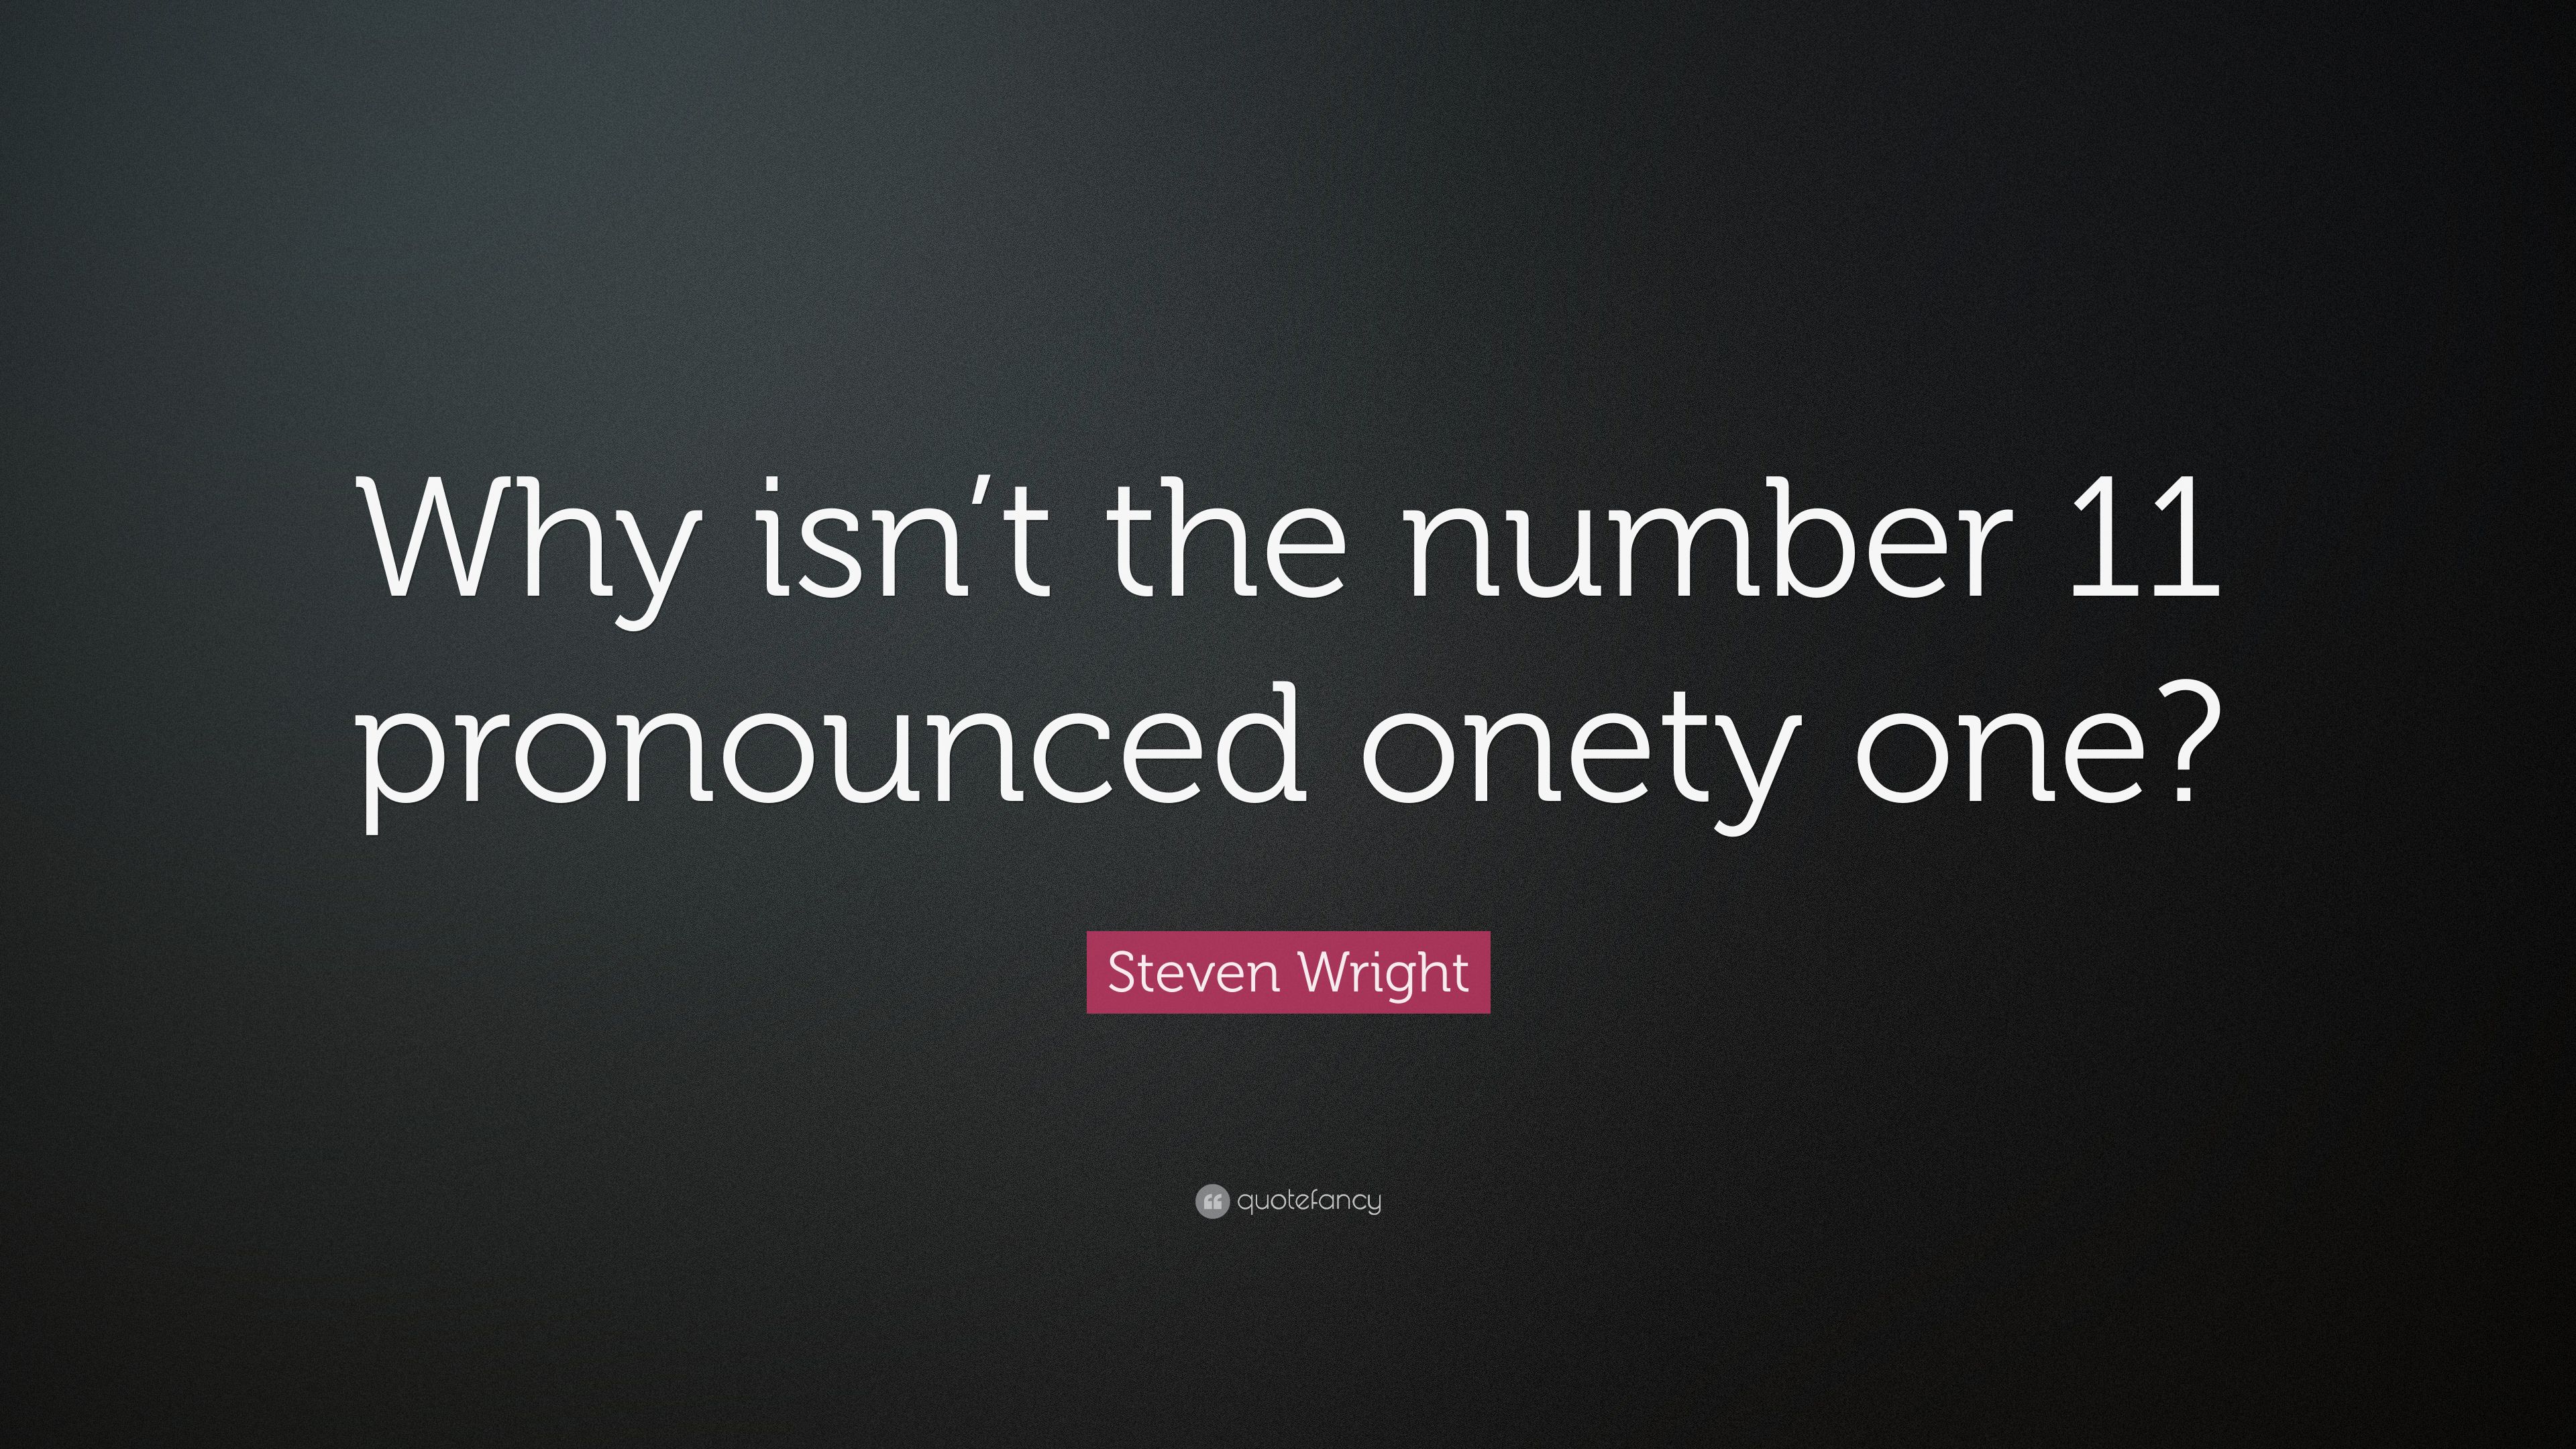 Steven Wright Quote: “Why isn't the number 11 pronounced onety one